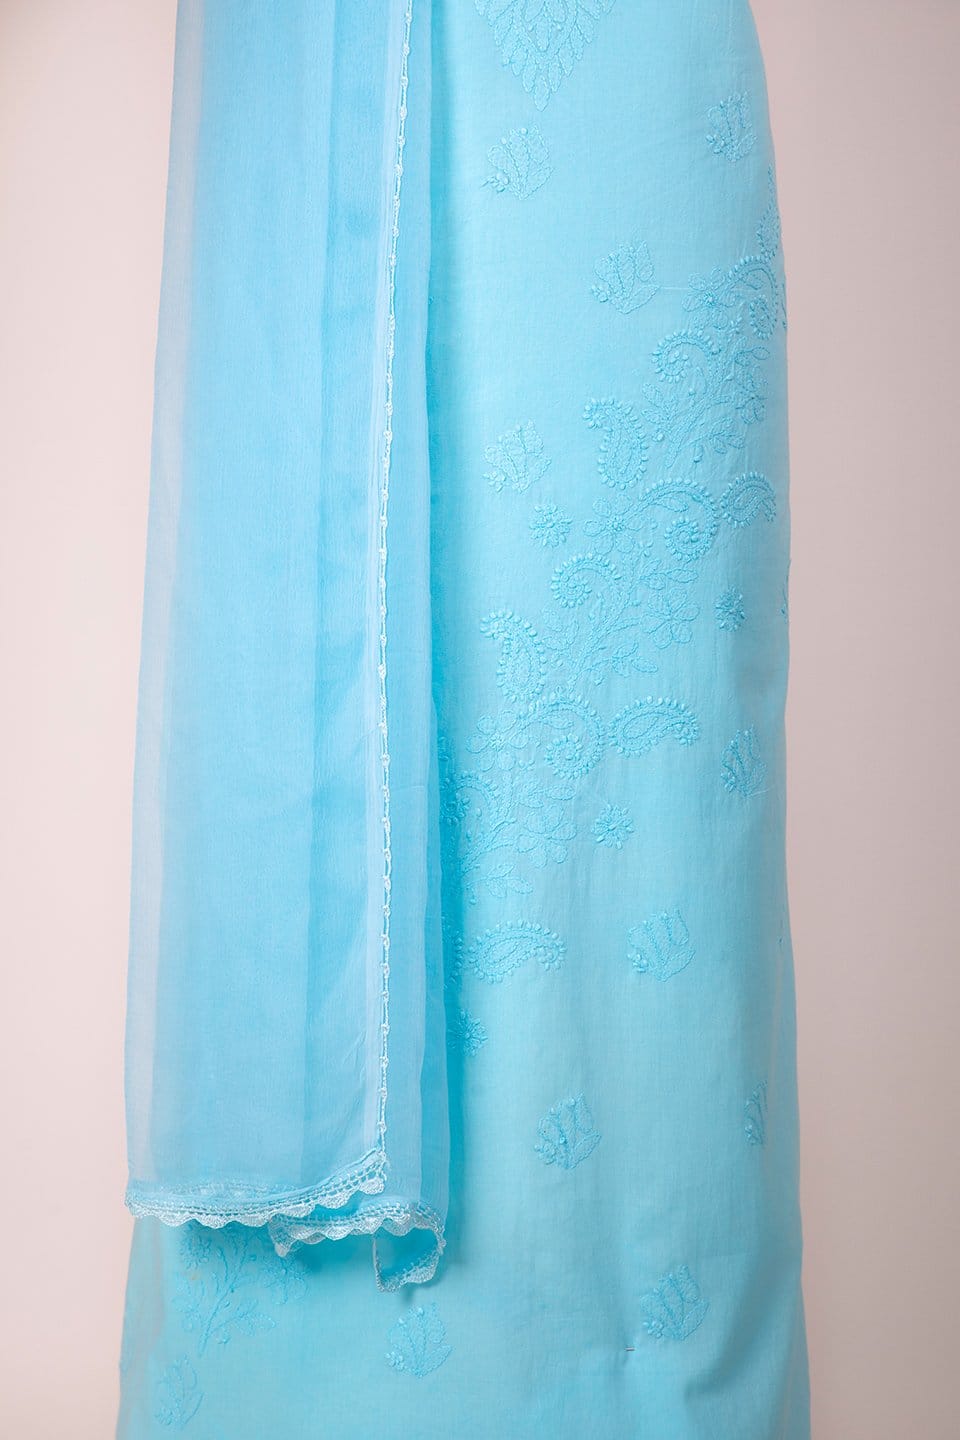 Hand Embroidered Lucknowi Chikan Soft Cotton SkyBlue Color Unstitched Suits 